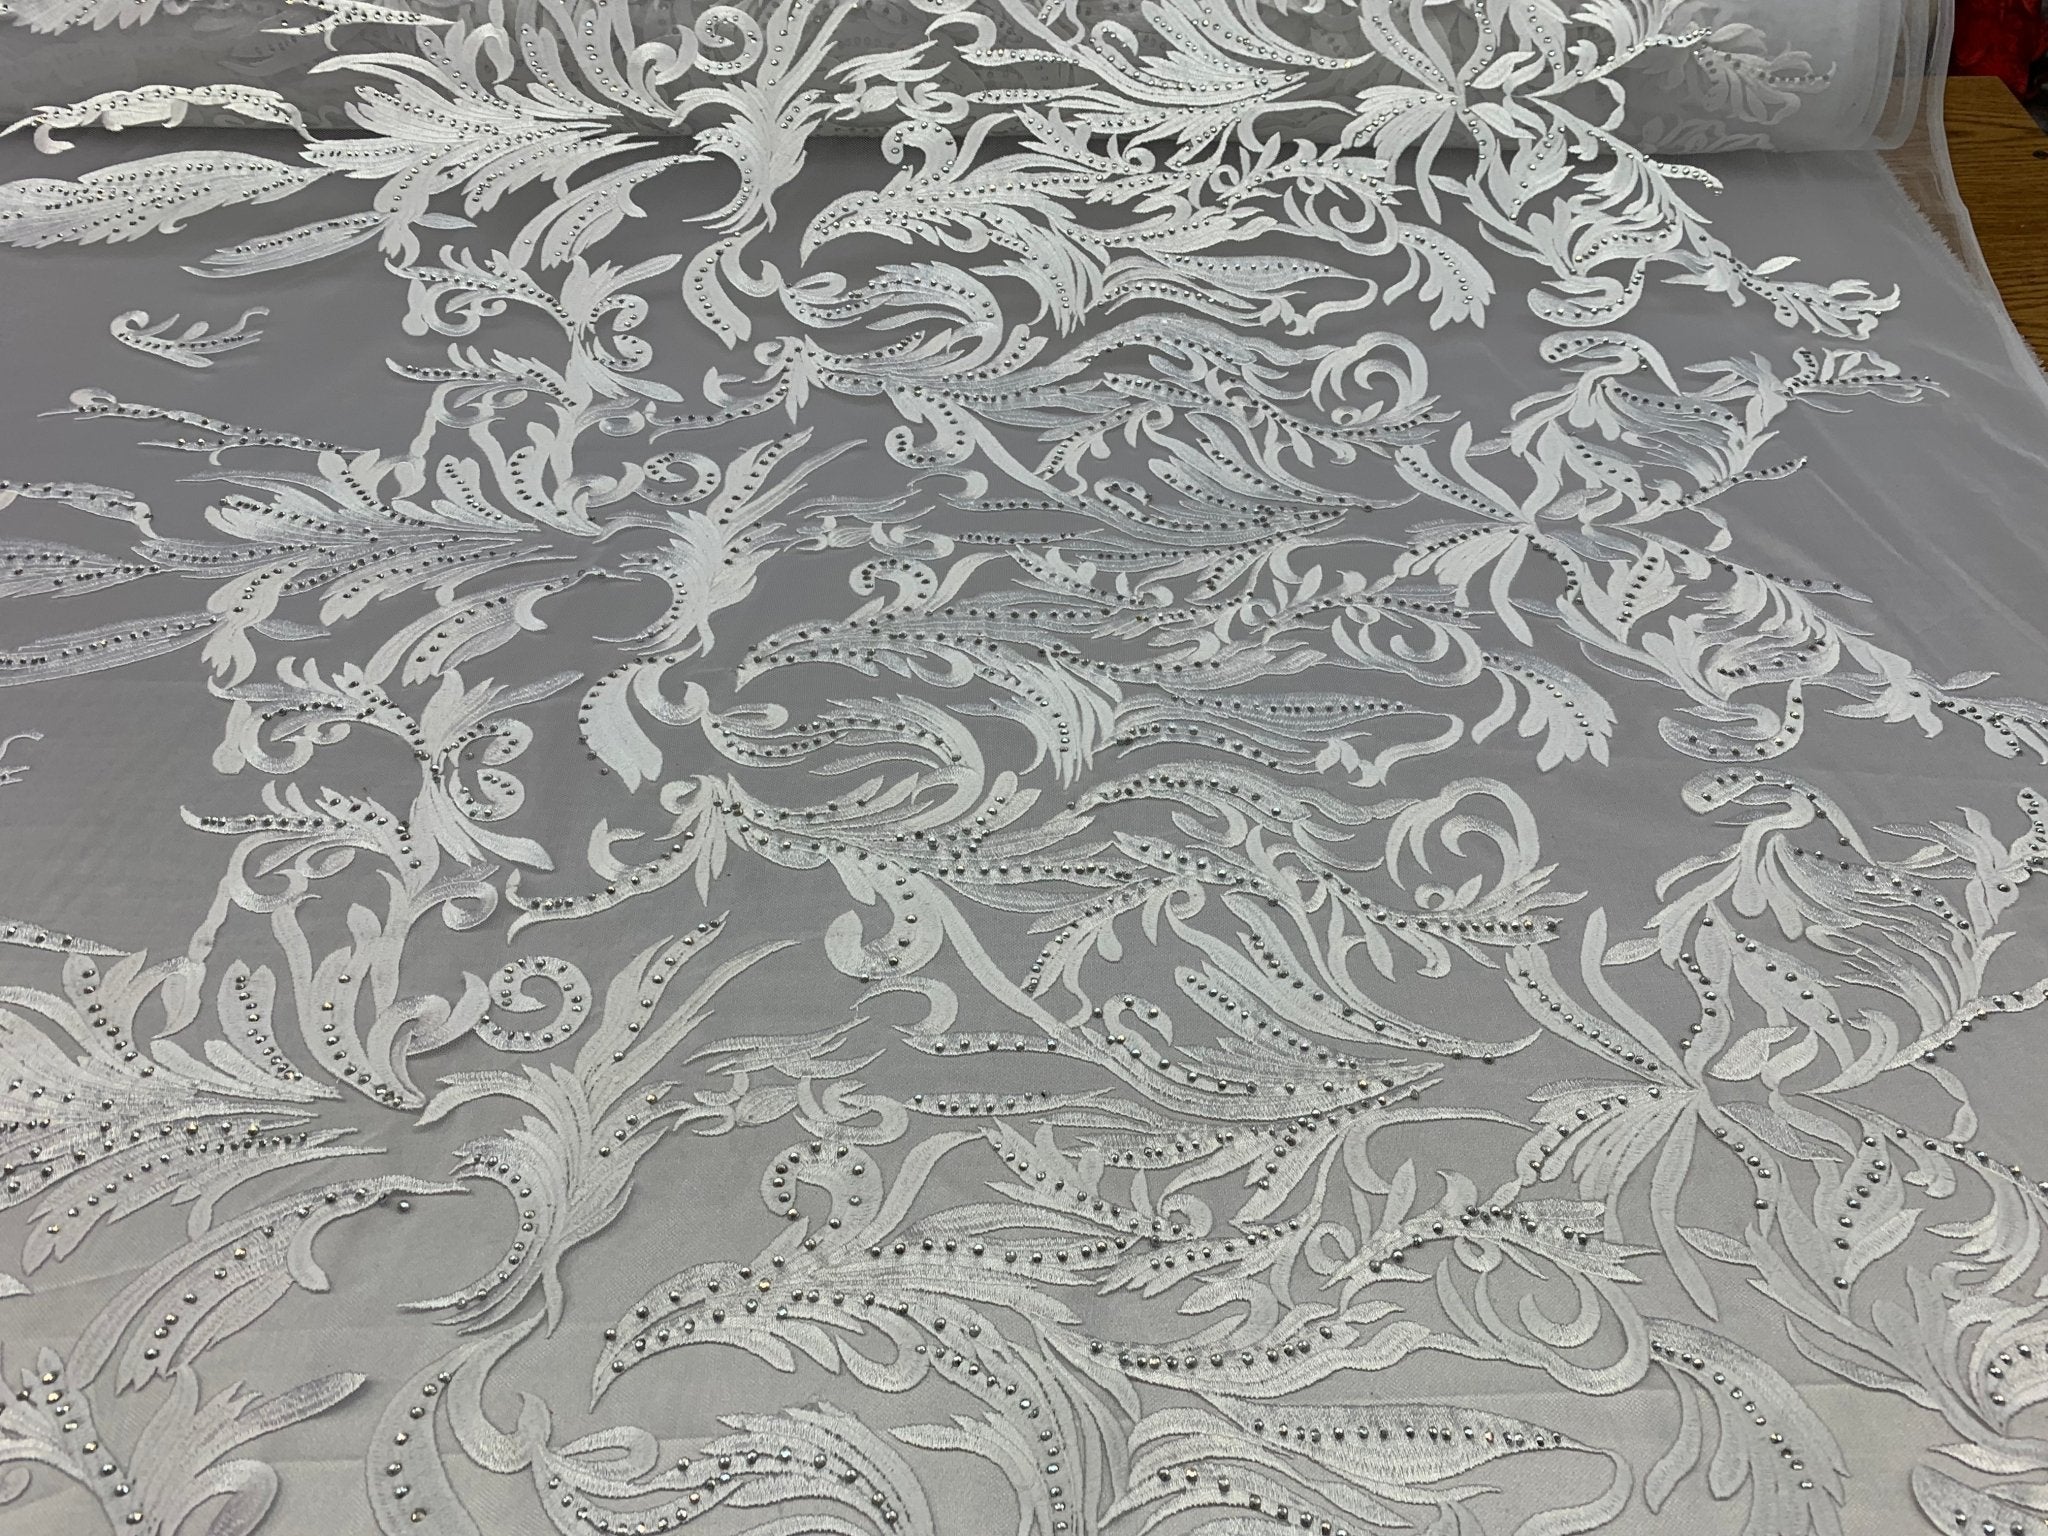 ONE Yard Mesh Lace Embroidered Fabric Leafs Design With Stones (White Color) High Quality Lace For Wedding/Prom/ Night Gowns Dress/ Fashion.ICE FABRICSICE FABRICSONE Yard Mesh Lace Embroidered Fabric Leafs Design With Stones (White Color) High Quality Lace For Wedding/Prom/ Night Gowns Dress/ Fashion. ICE FABRICS